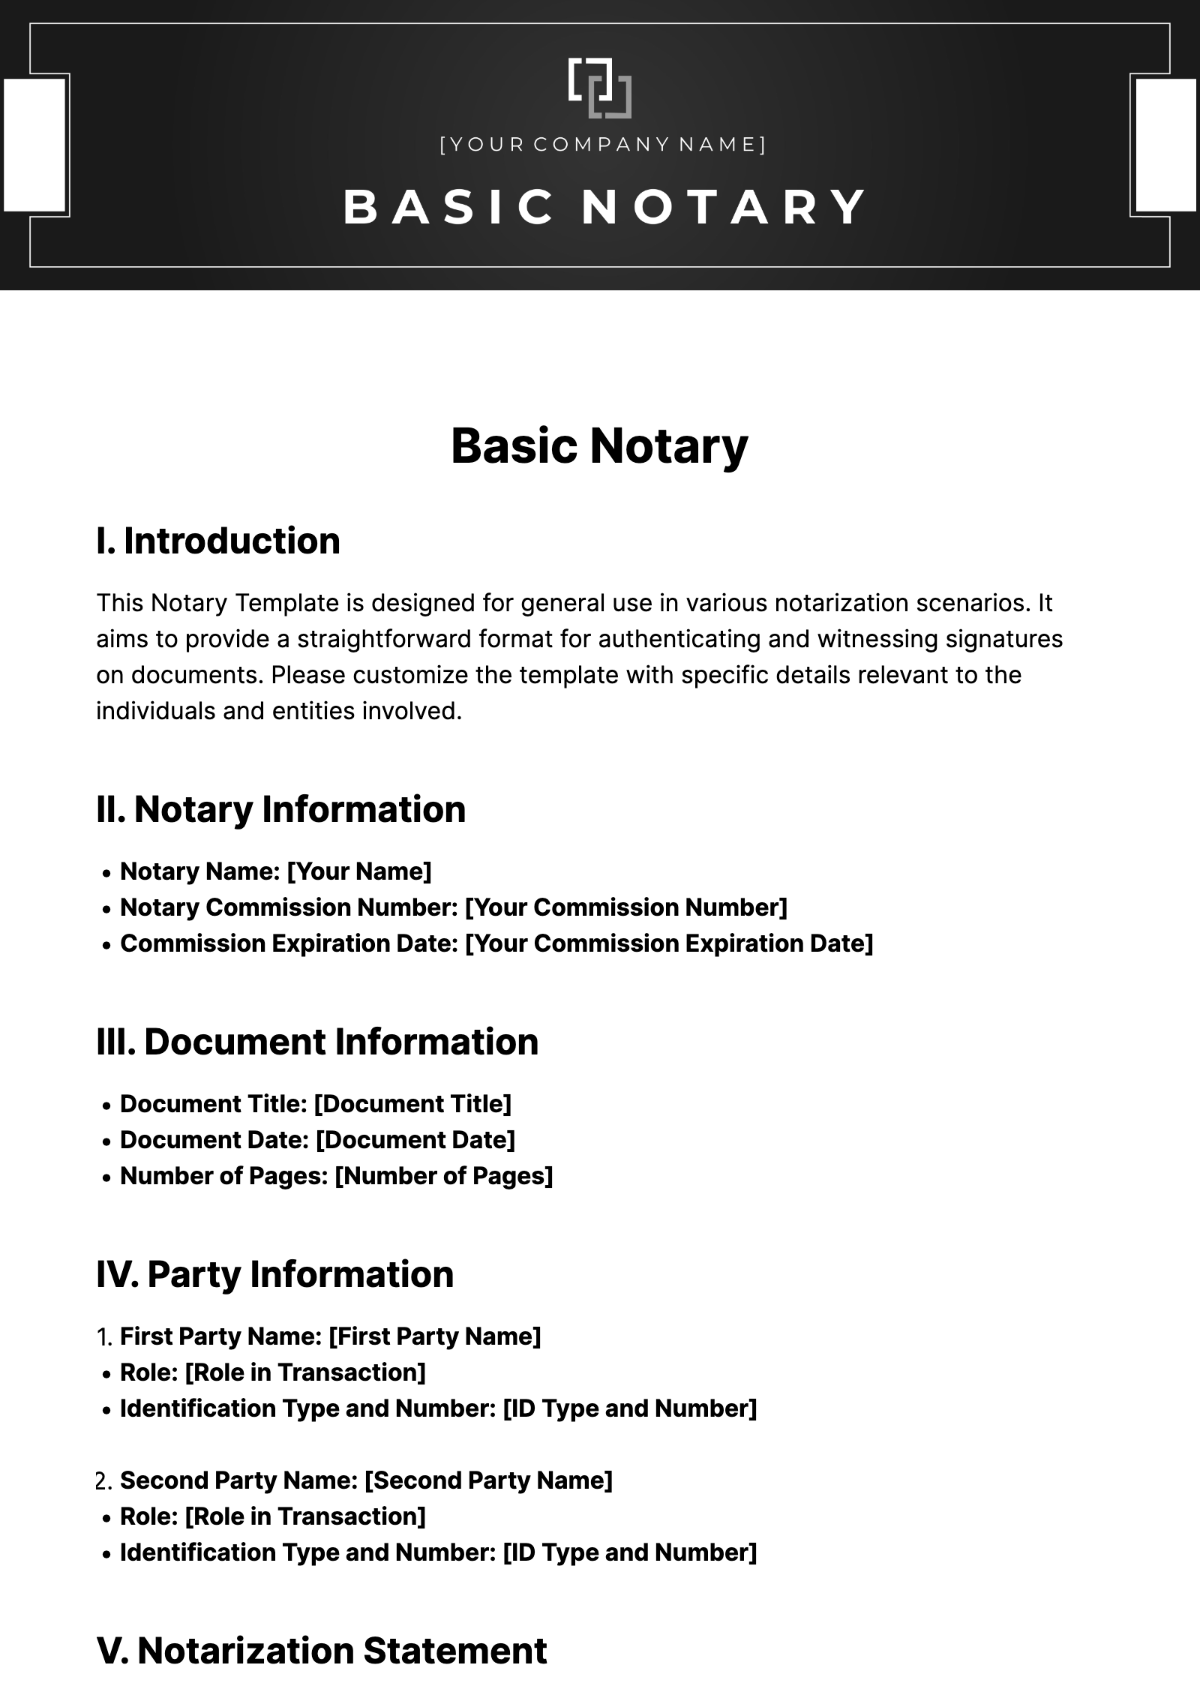 Basic Notary Template